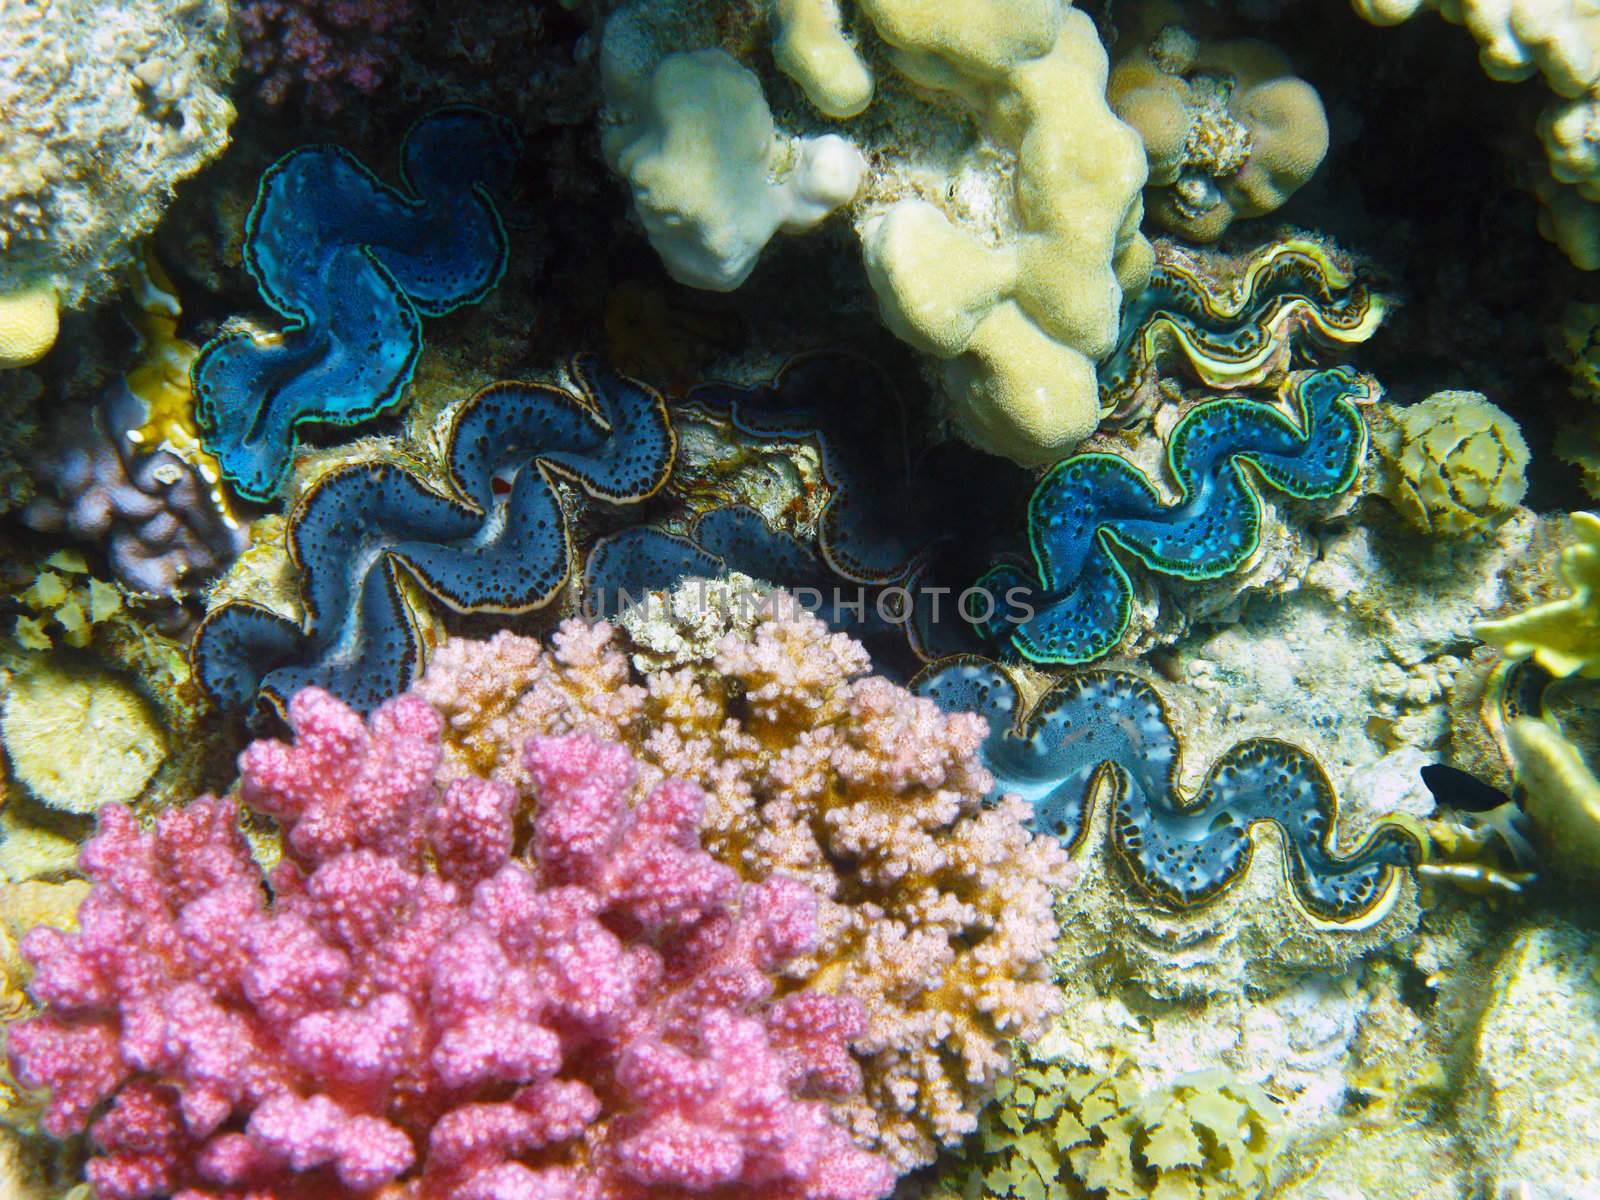 Rugose giant clams by vintrom